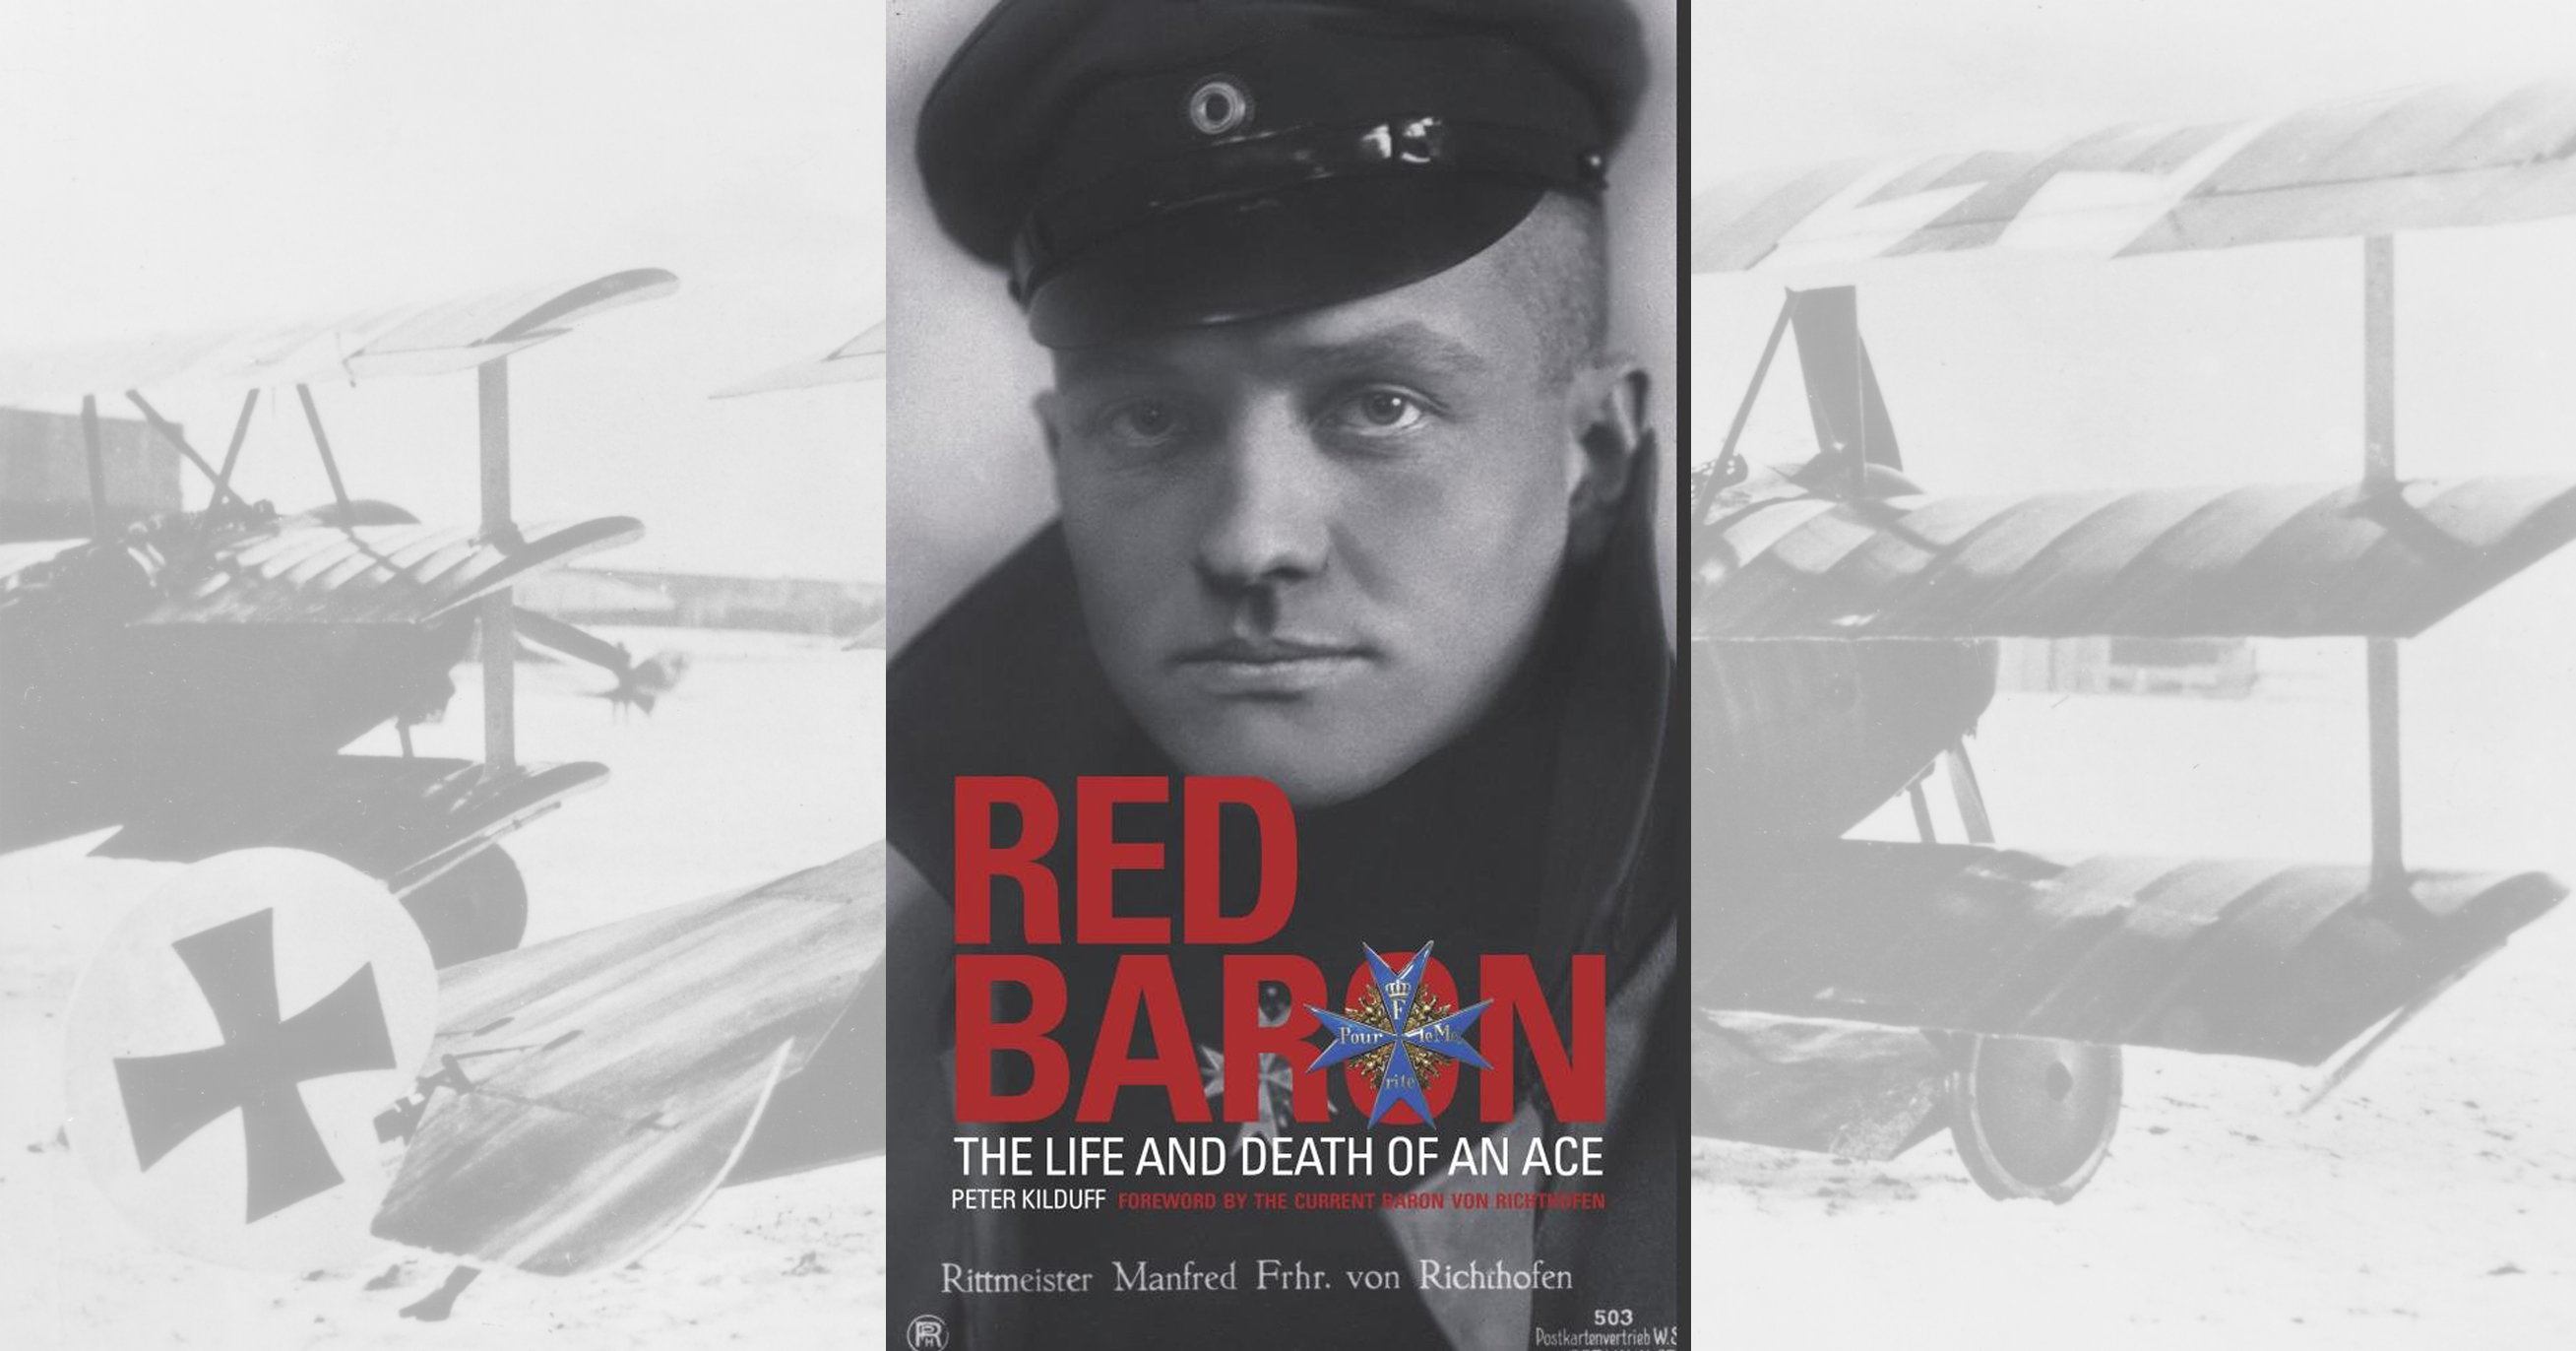 The Red Baron: The Life and Death of an Ace: Kilduff storeM, Peter